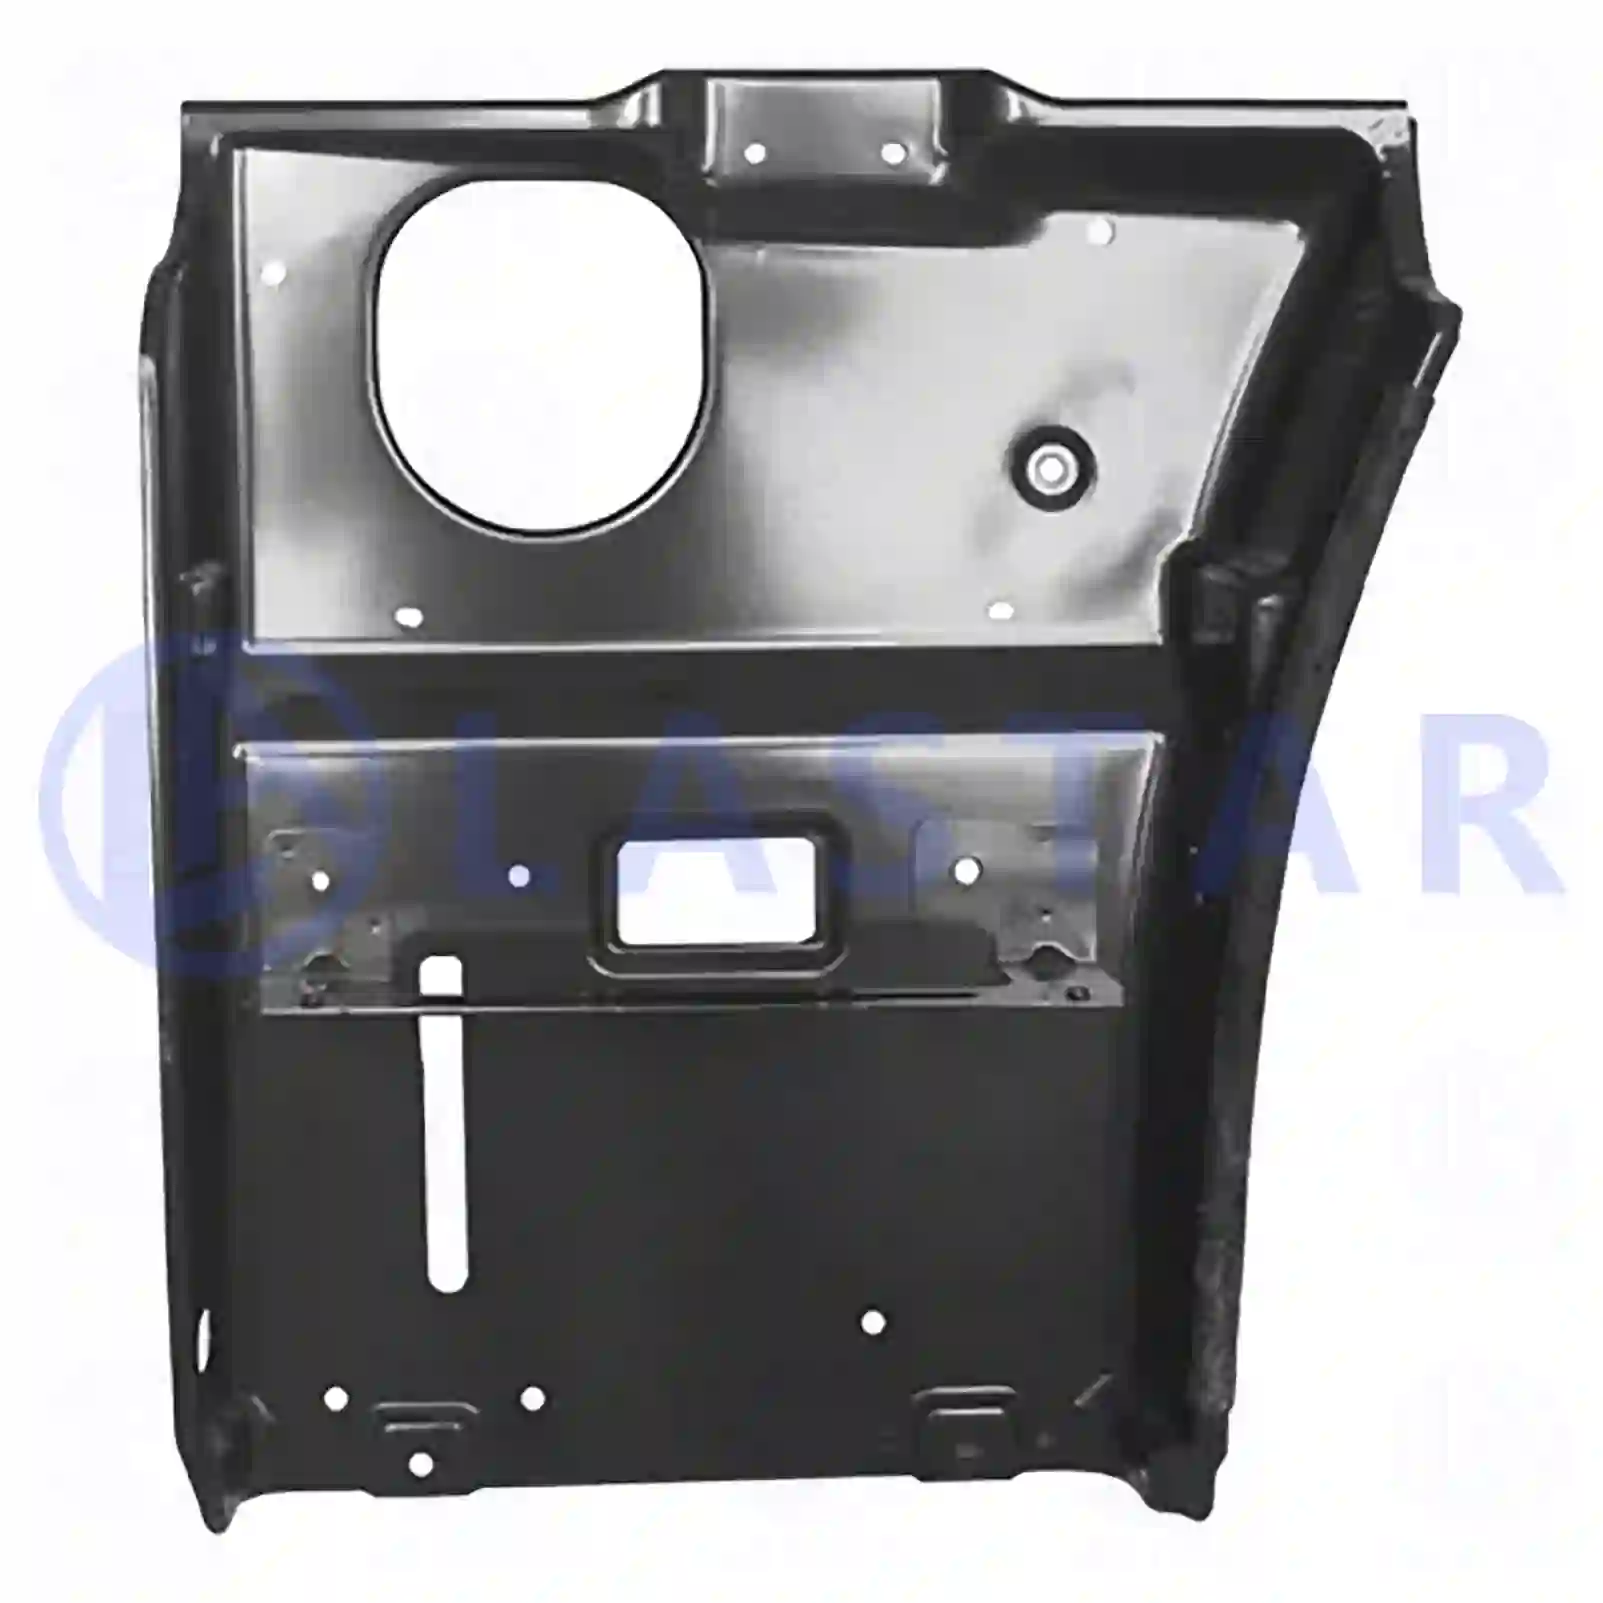 Step well case, left, metal, 77721687, 1498179, 1854227, ZG61202-0008 ||  77721687 Lastar Spare Part | Truck Spare Parts, Auotomotive Spare Parts Step well case, left, metal, 77721687, 1498179, 1854227, ZG61202-0008 ||  77721687 Lastar Spare Part | Truck Spare Parts, Auotomotive Spare Parts